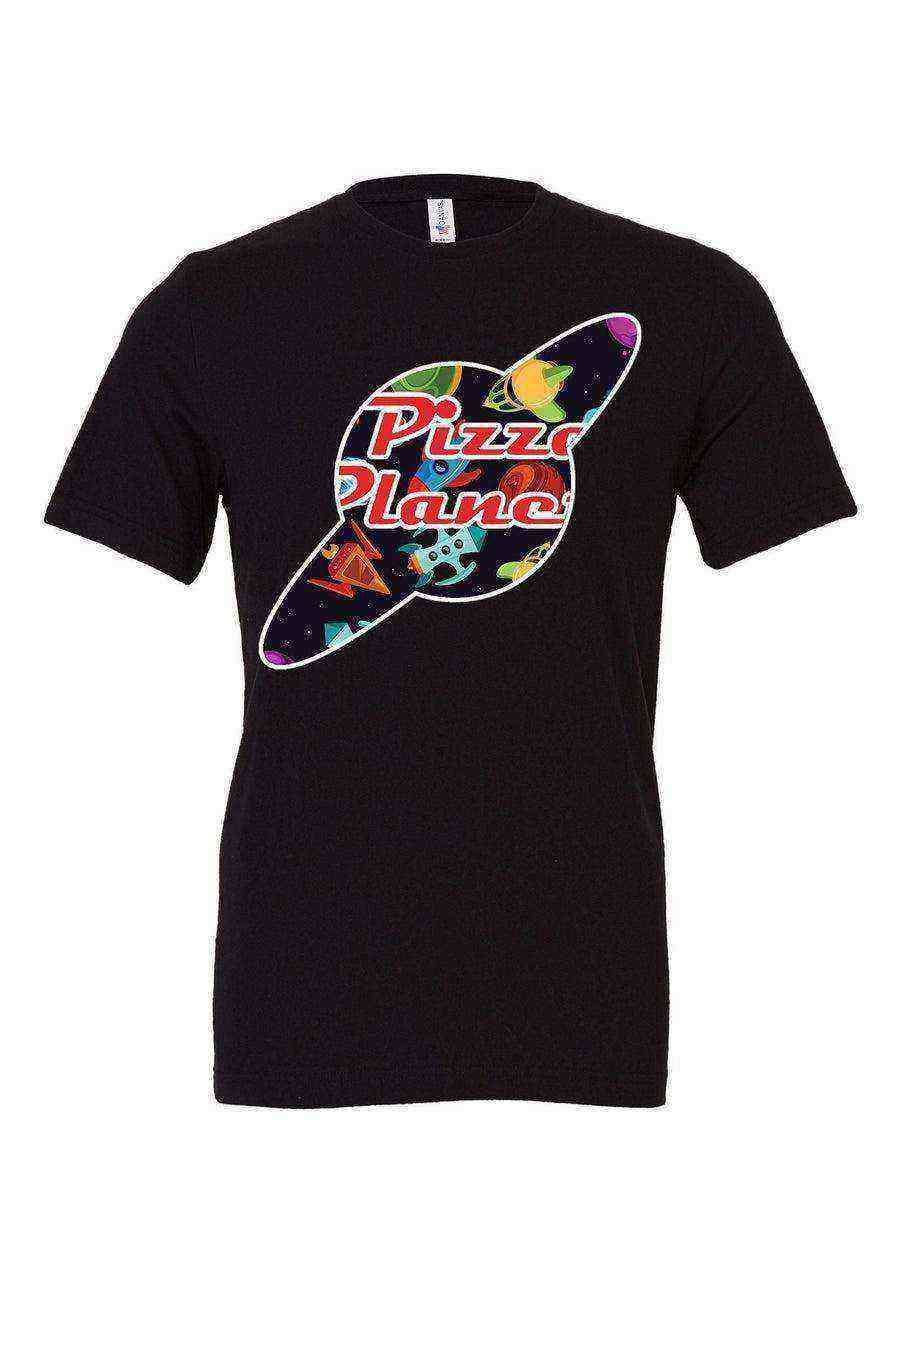 Graffiti Pizza Planet Tee | Toy Story Shirt | Pizza Planet Party Shirt - Dylan's Tees